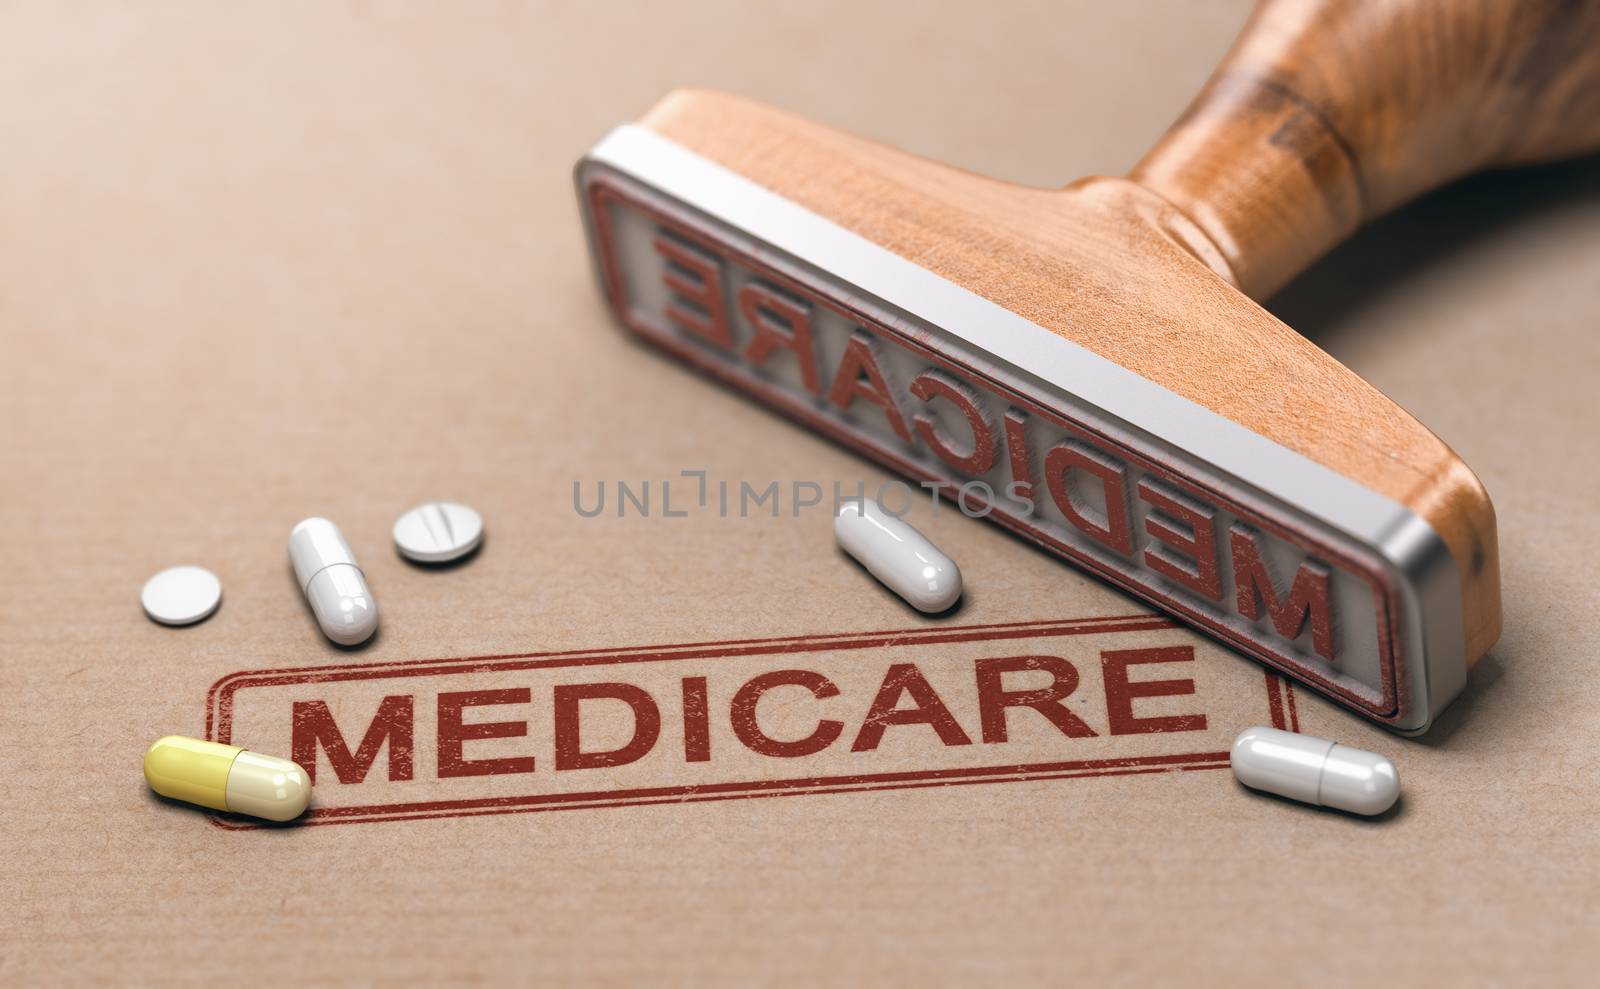 Medicare, National Health Insurance Program In The United States by Olivier-Le-Moal